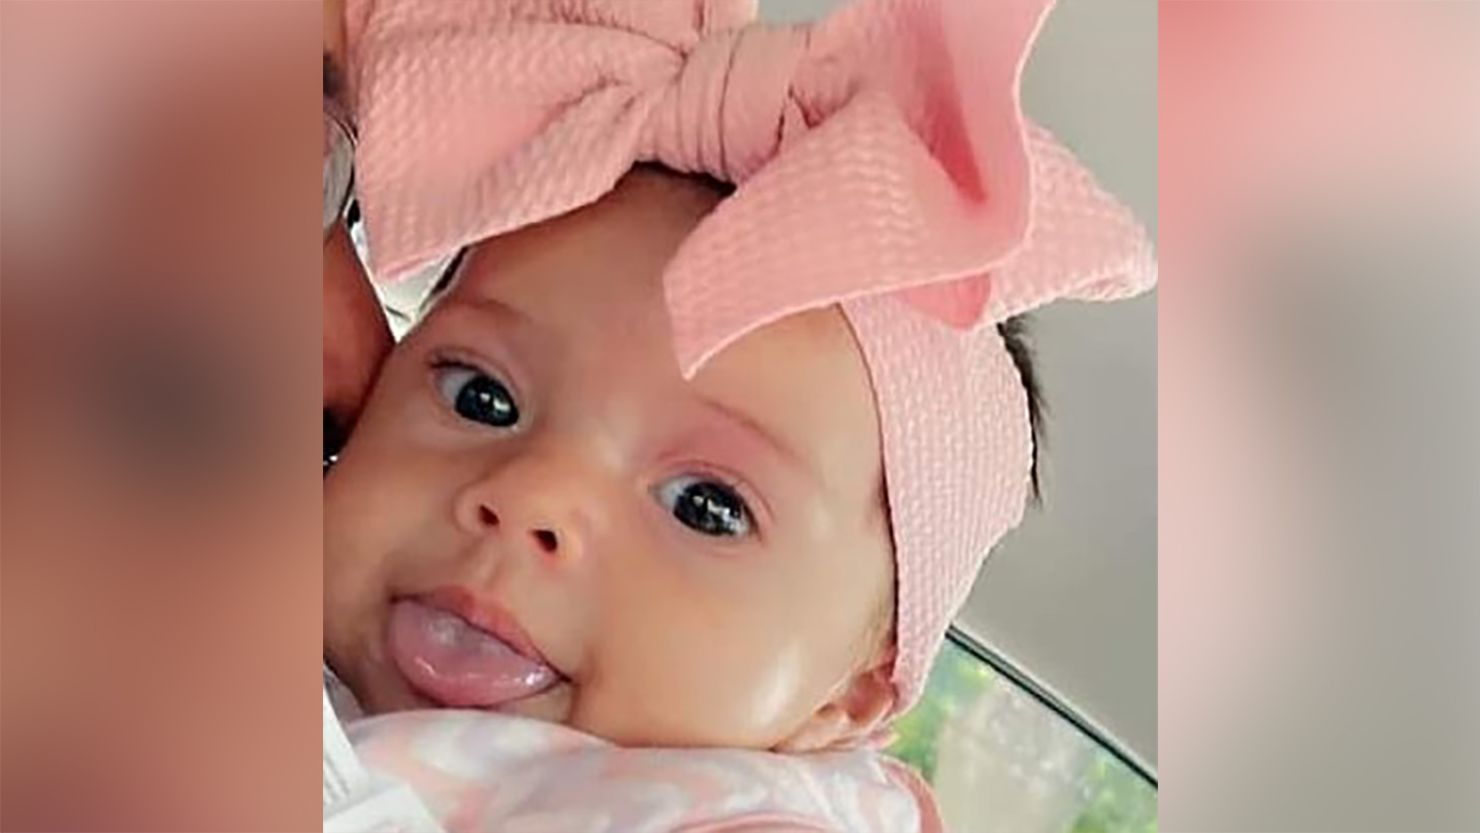 10-month-old Eleia Maria Torres was abducted from a park in New Mexico Friday, investigators said.